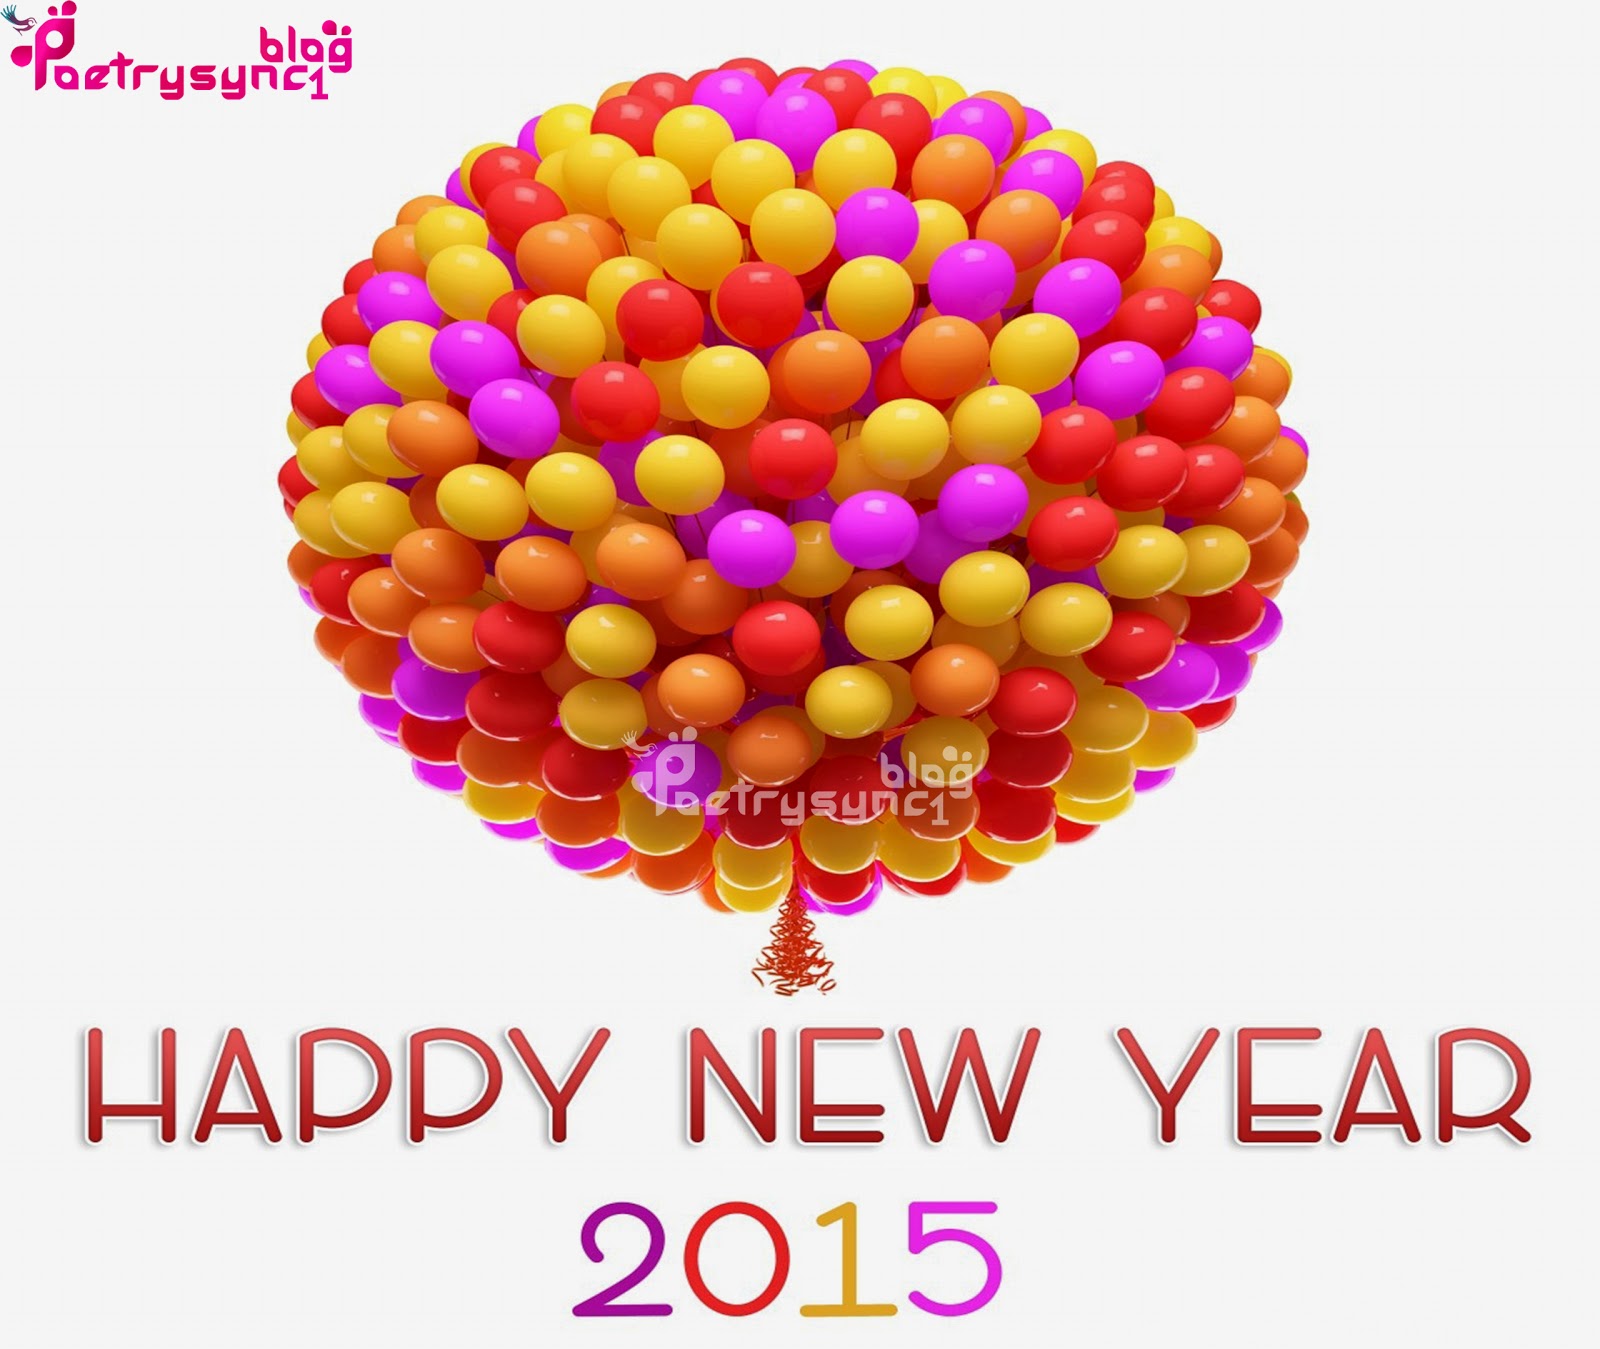 2015 happy new year wishes wallpaper with bunch of ballos Hd